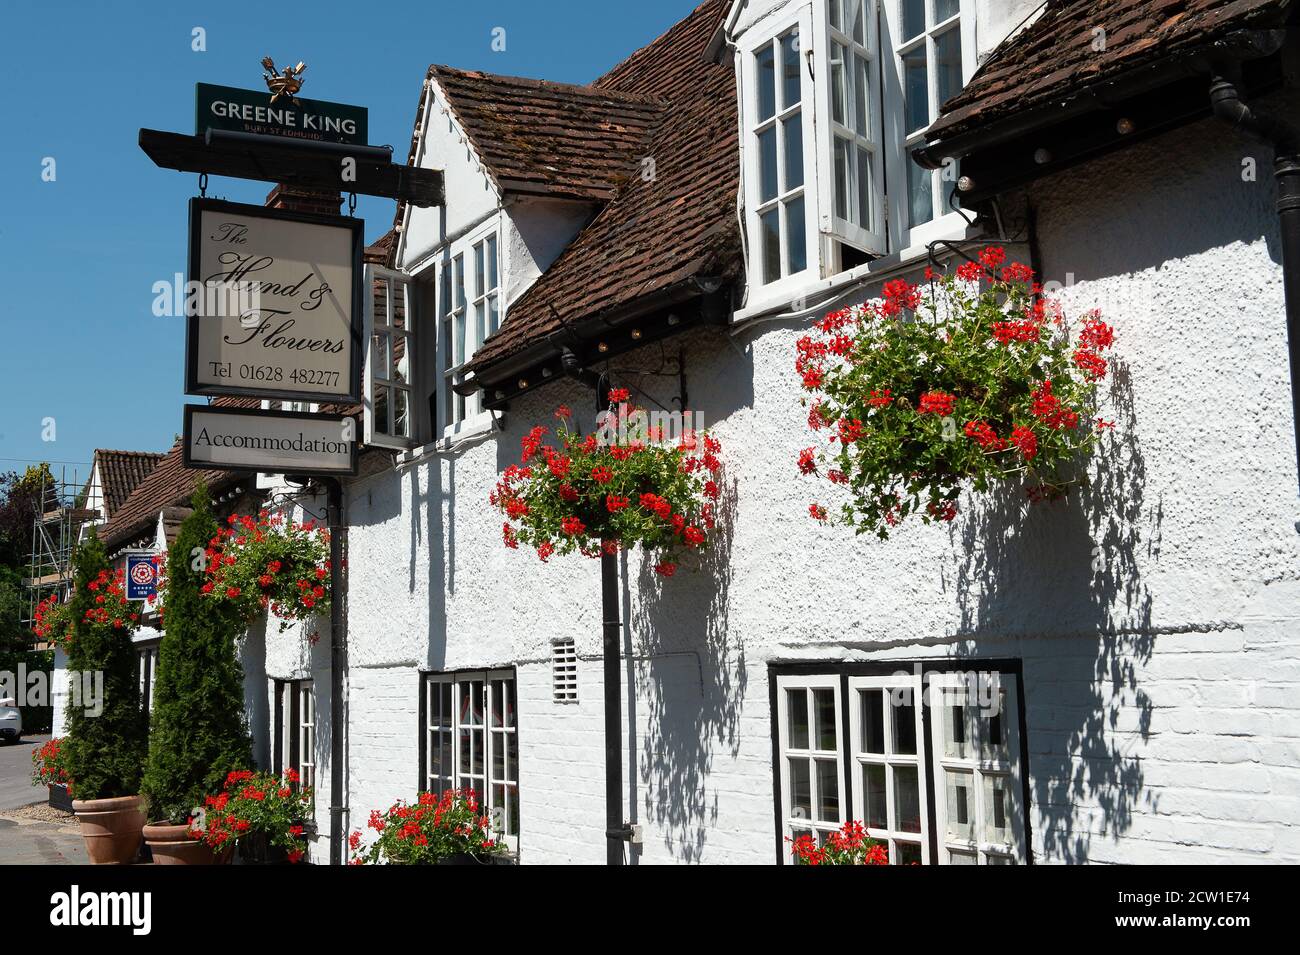 Marlow, Buckinghamshire, UK. 25th June, 2020. Celebrity Chef Tom Kerridge's Hand and Flowers inn, pub and restaurant in Marlow, Buckinghamshire are getting ready to reopen from 4th July 2020 following the easing of the Coronavirus Covid-19 Pandemic lockdown rules. Credit: Maureen McLean/Alamy Stock Photo